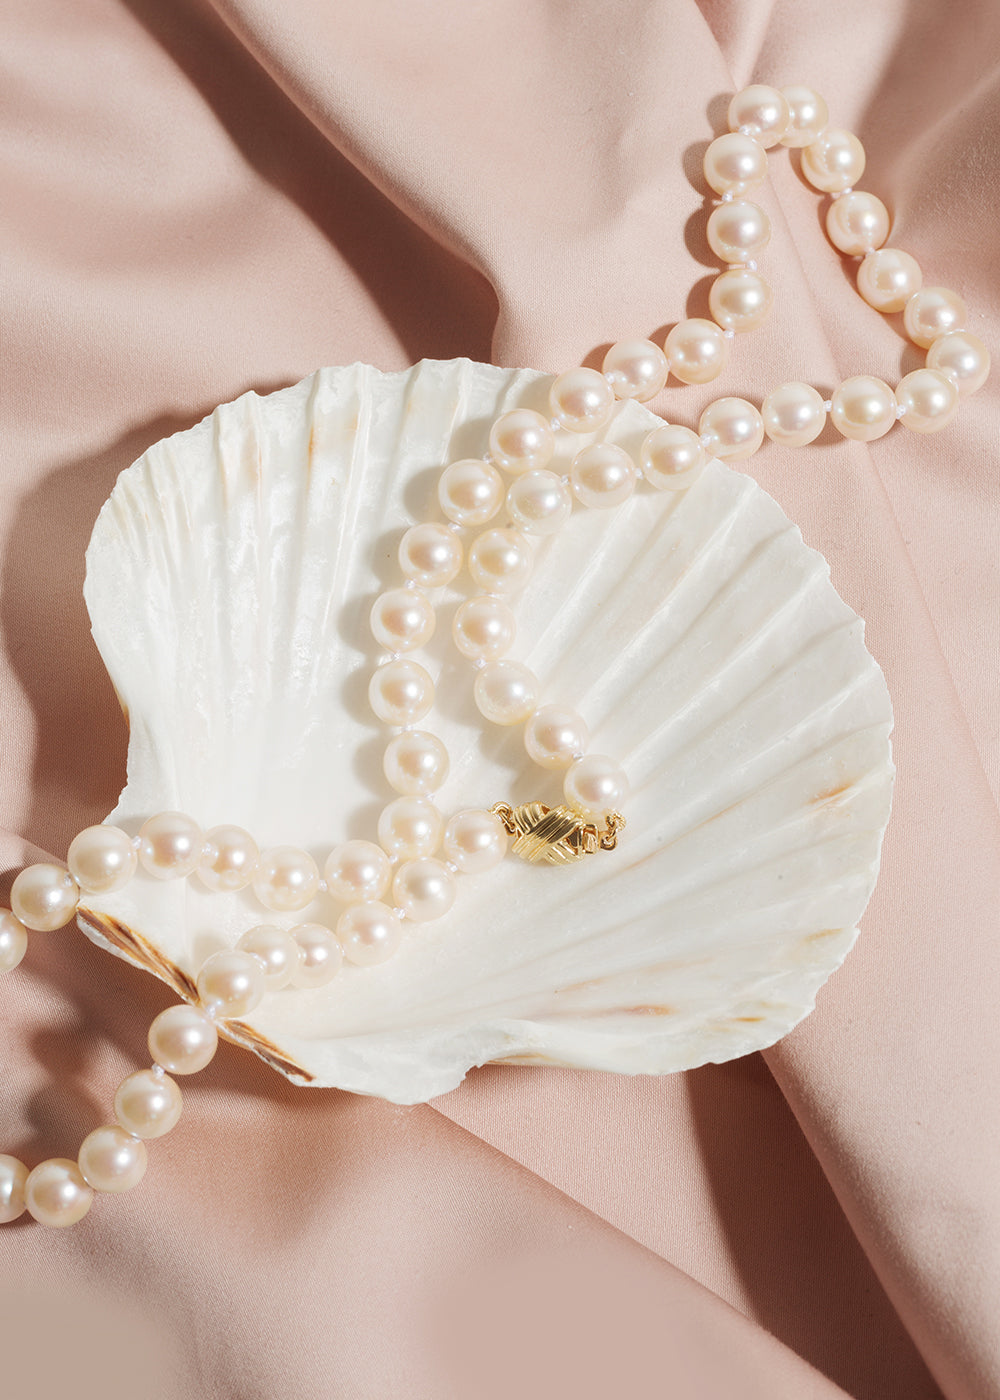 What is the best color for a pearl necklace?